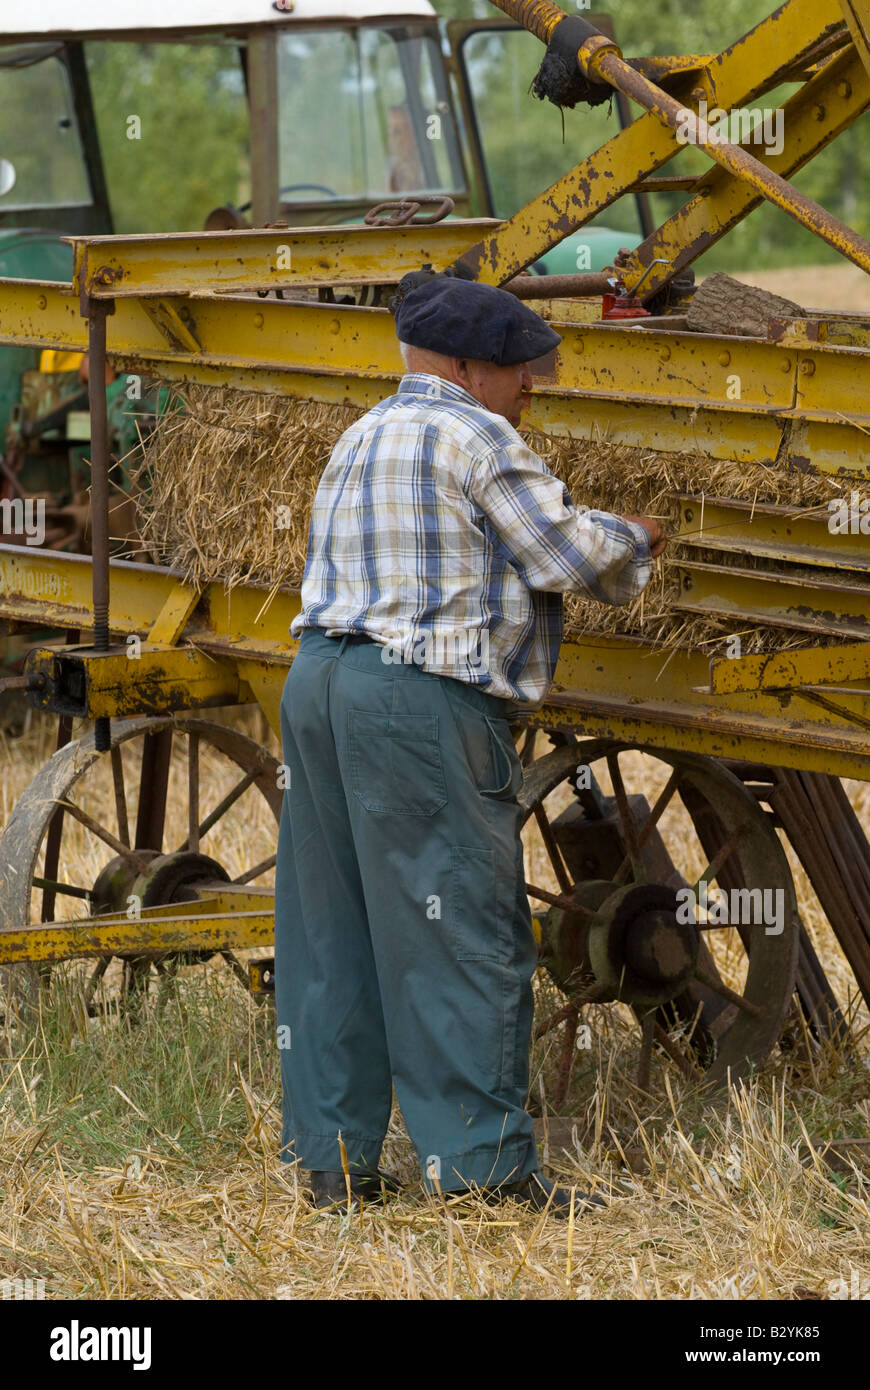 French peasant working on old straw baler machine at agricultural show, Indre, France. Stock Photo